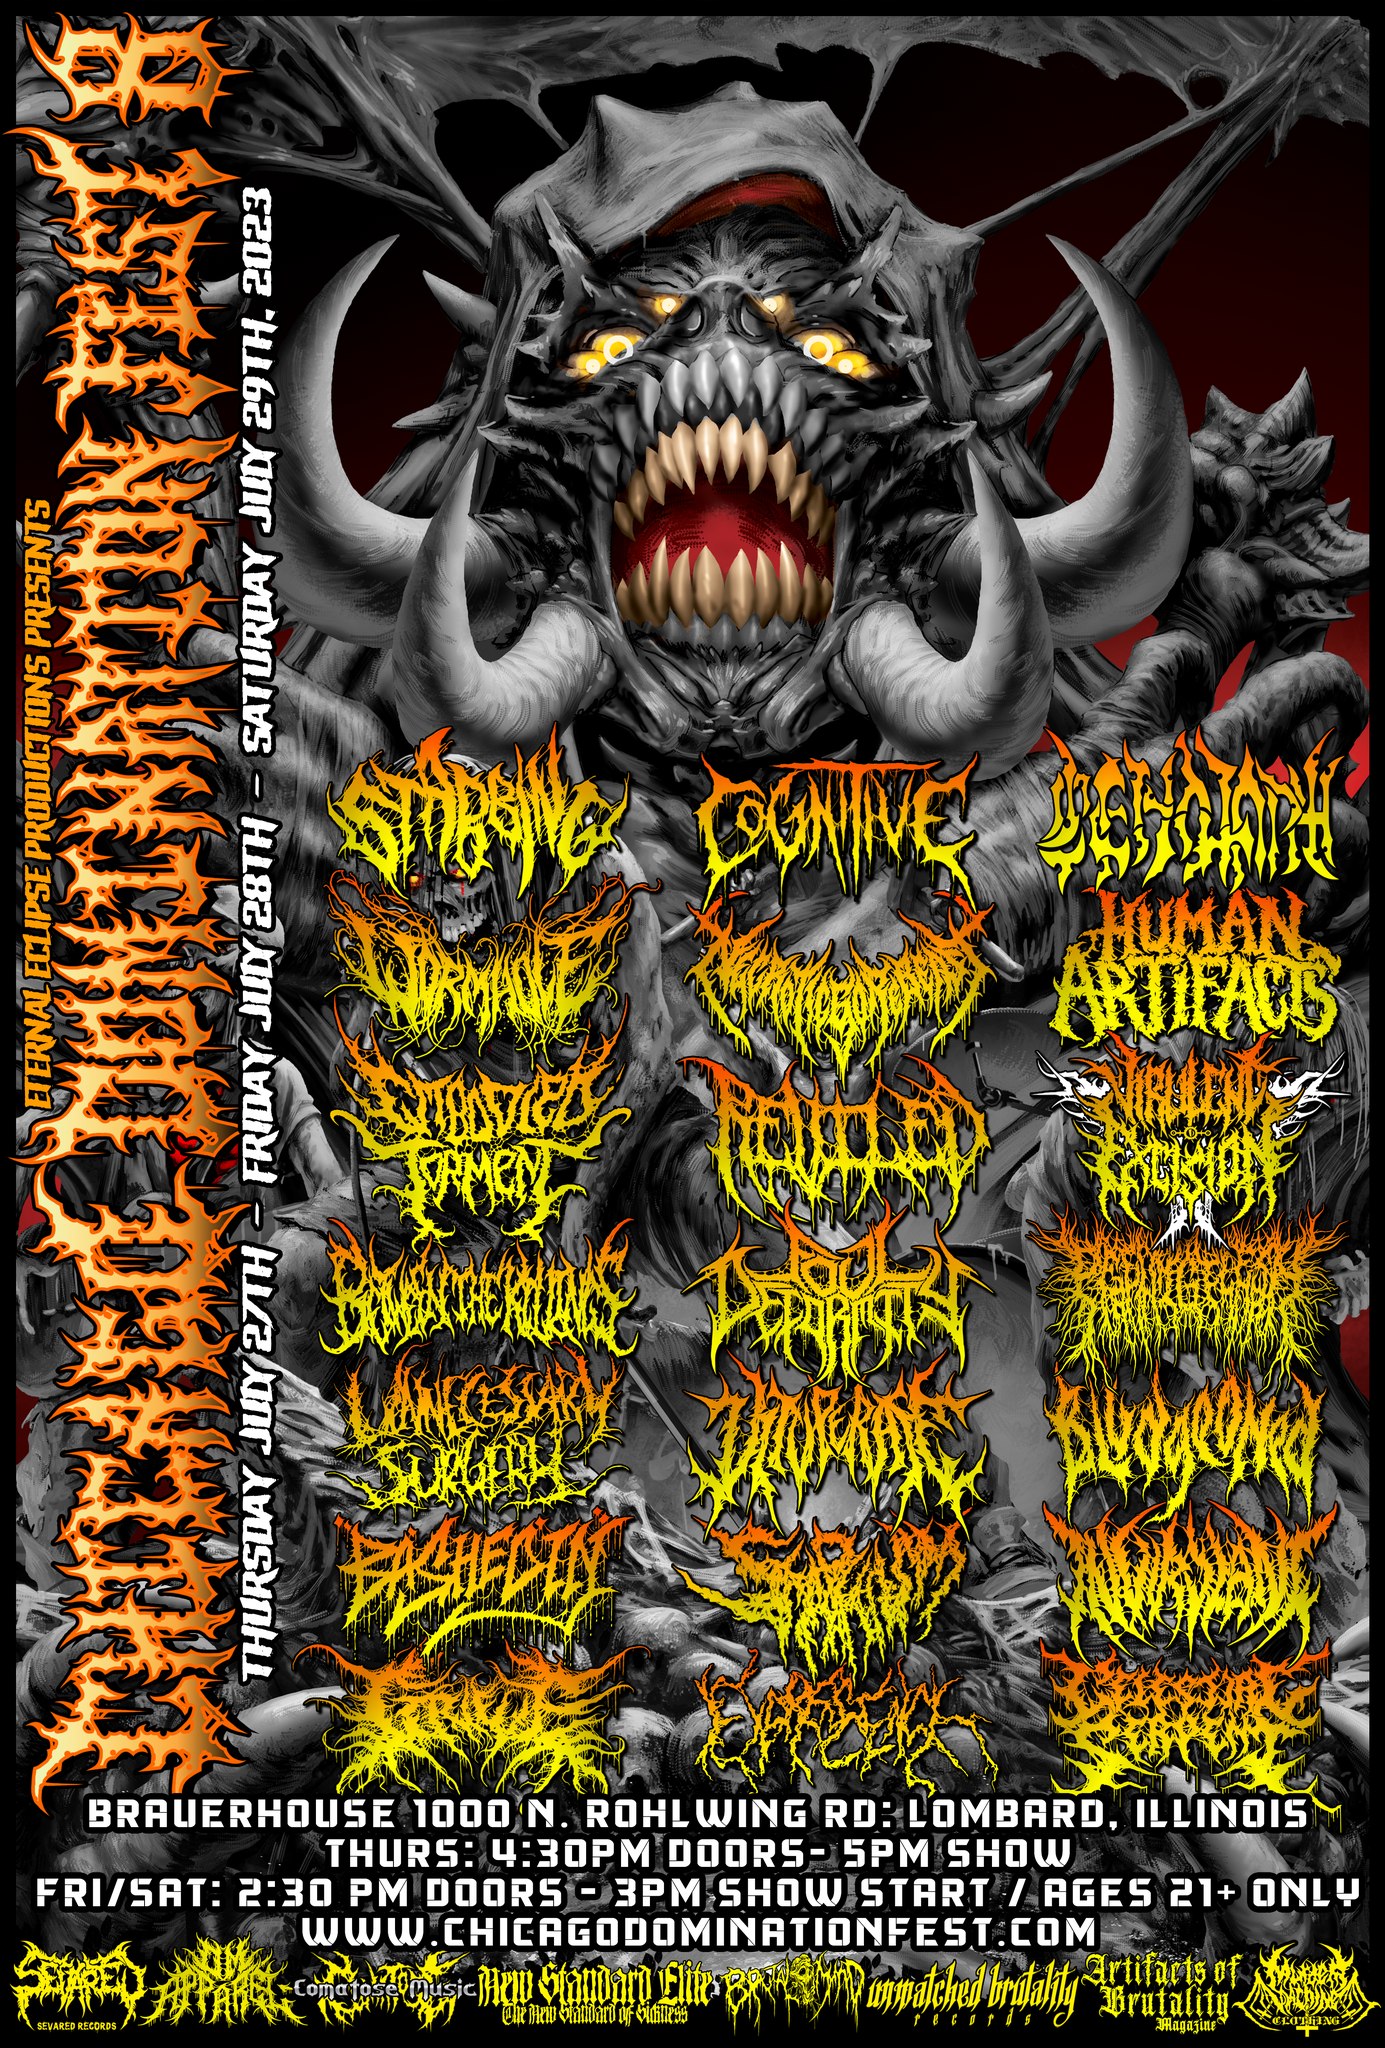 Chicago Domination Fest 8, July 27th-29th - Featuring Between The Killings, Foul Deformity, PeelingFlesh, Unnecessary Surgery, stabbing, Vituperate, Bludgeoned, INVIRULANT, Scaphism, BASHED IN, Excrescence, Celestial Serpent, cognitive, cenotaph, and more TBA